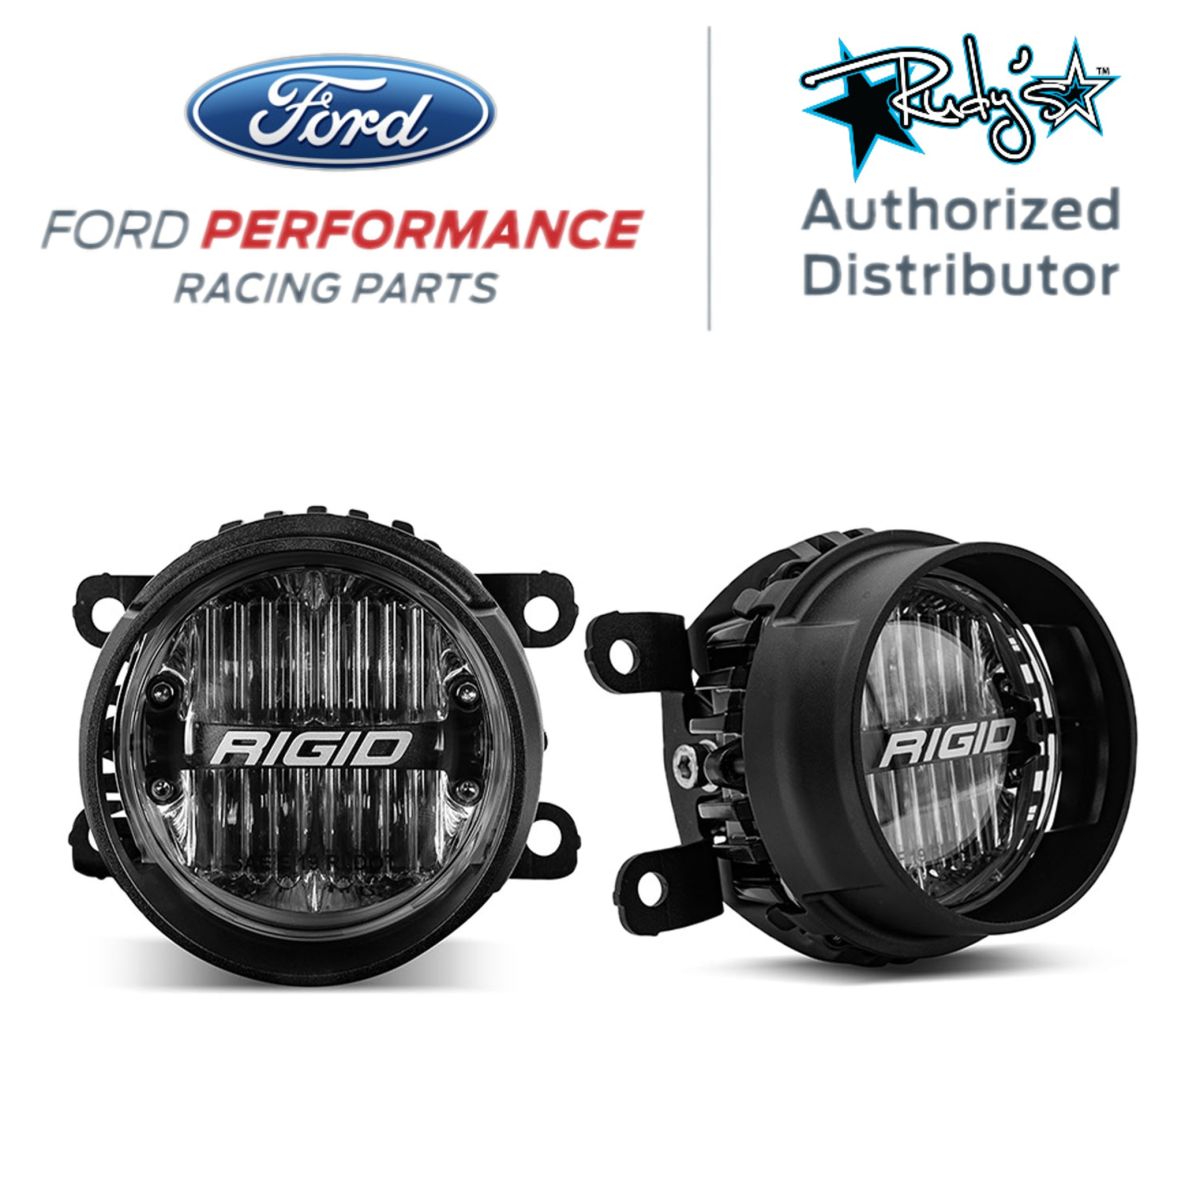 Ford Racing - Ford Performance Rigid Off-Road Fog Light Kit For 21+ Ford Bronco W/ Base Bumper